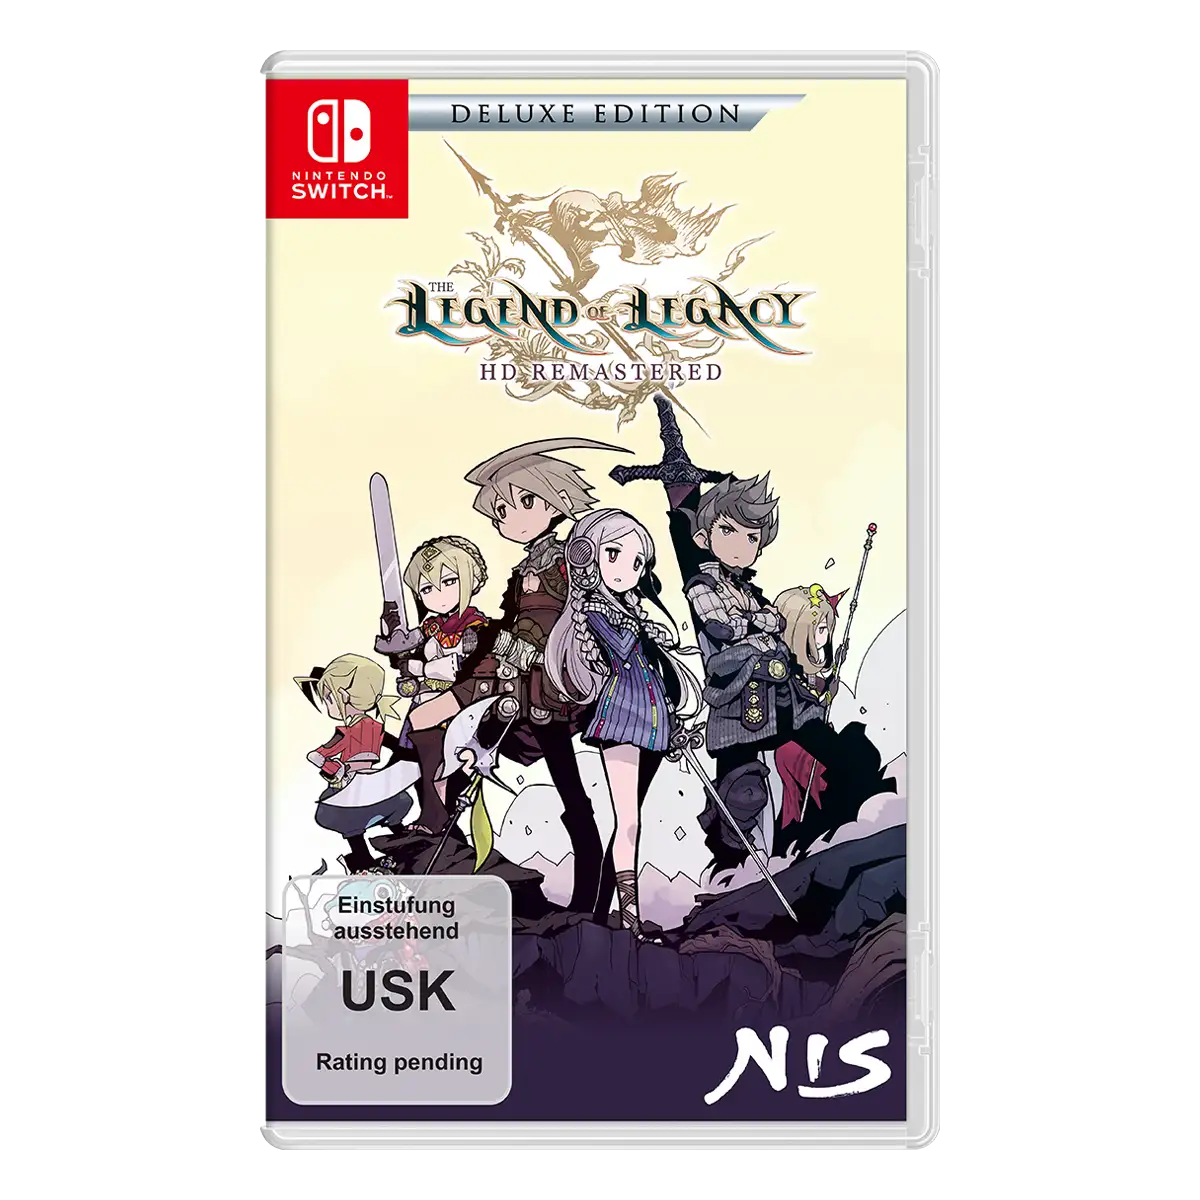 The Legend of Legacy HD Remastered - Deluxe Edition (Switch) Cover